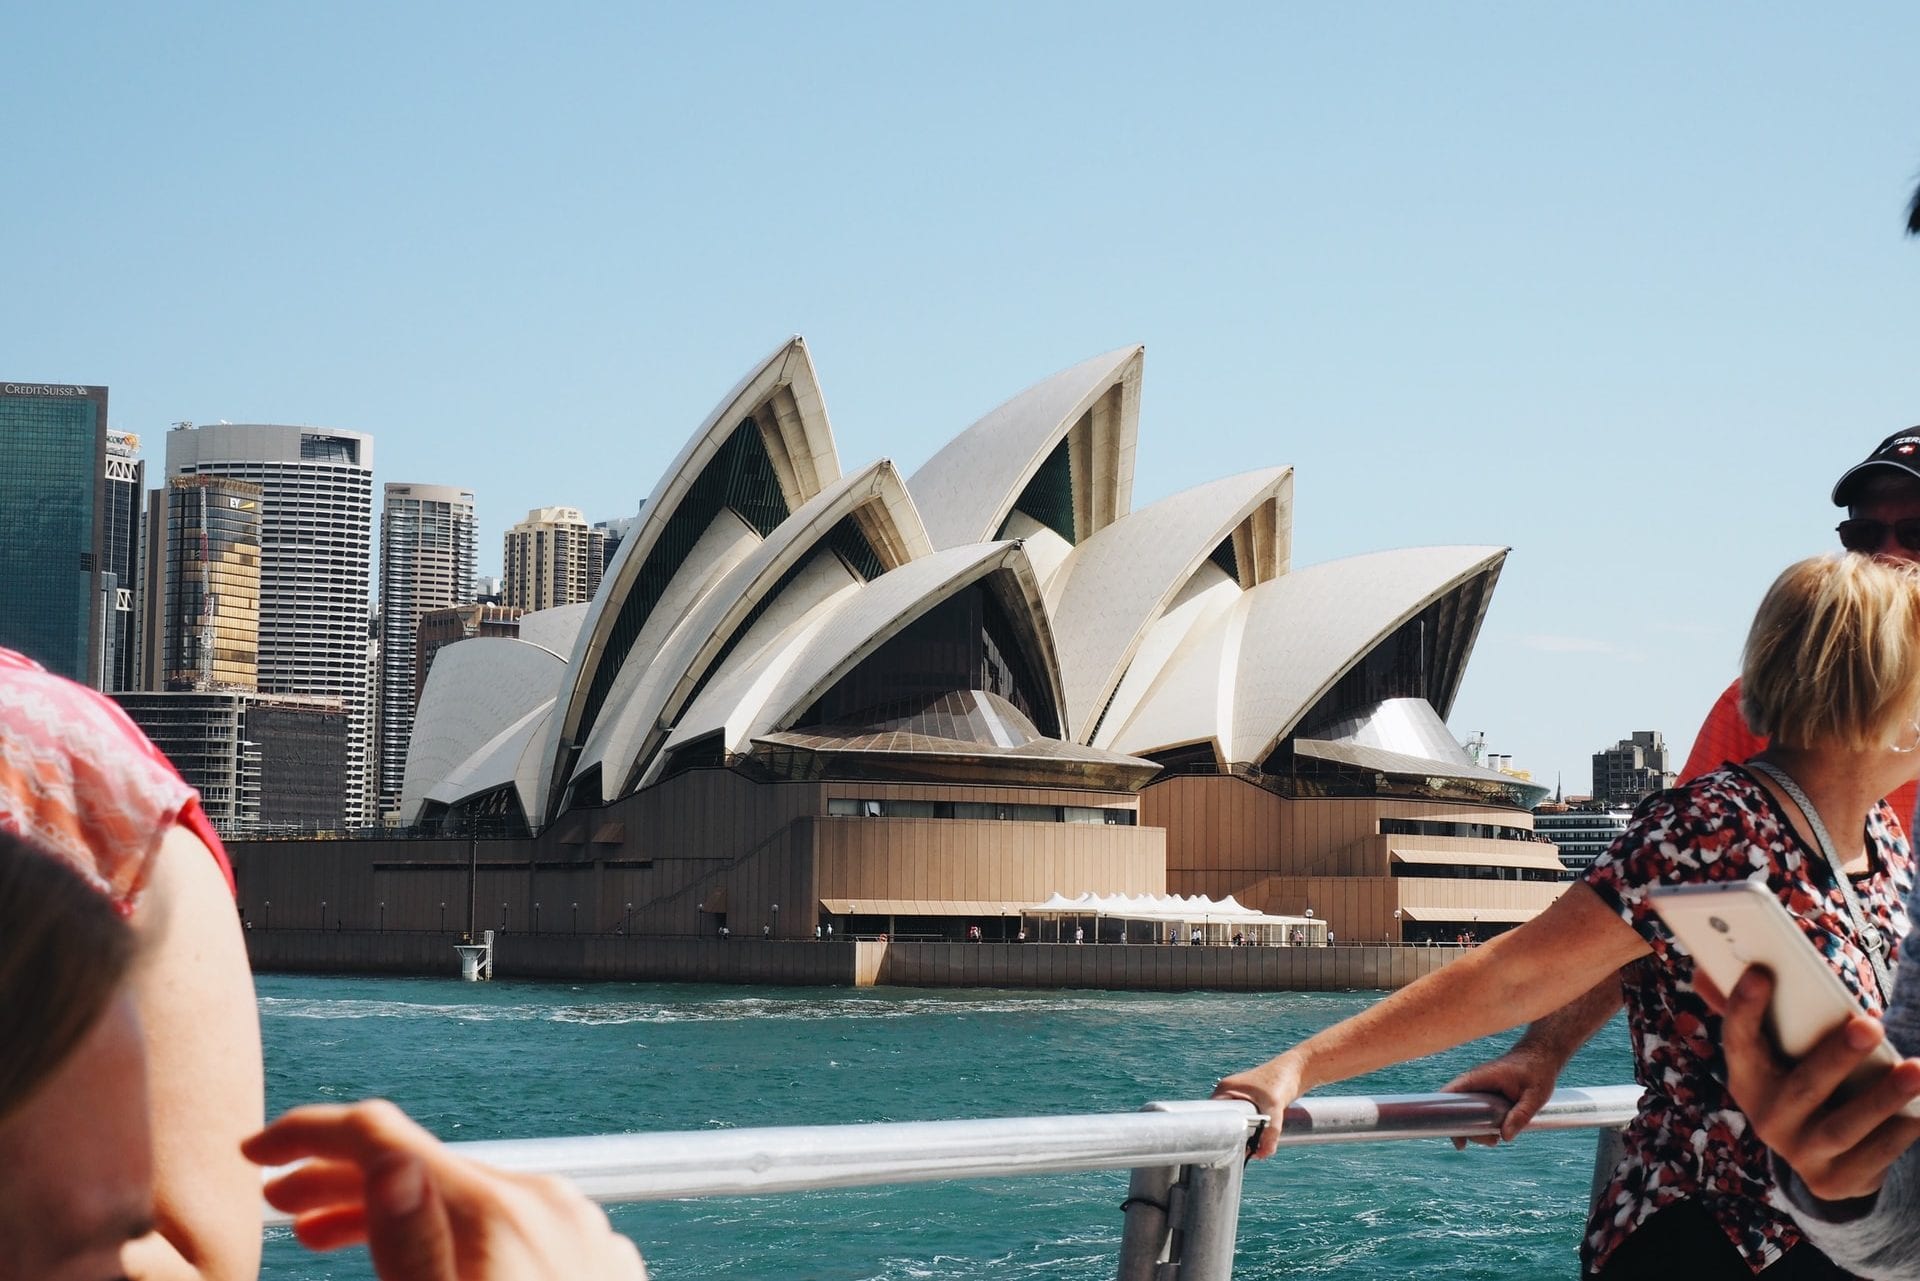 Australia banned the entry of cruise ships in March 2020.